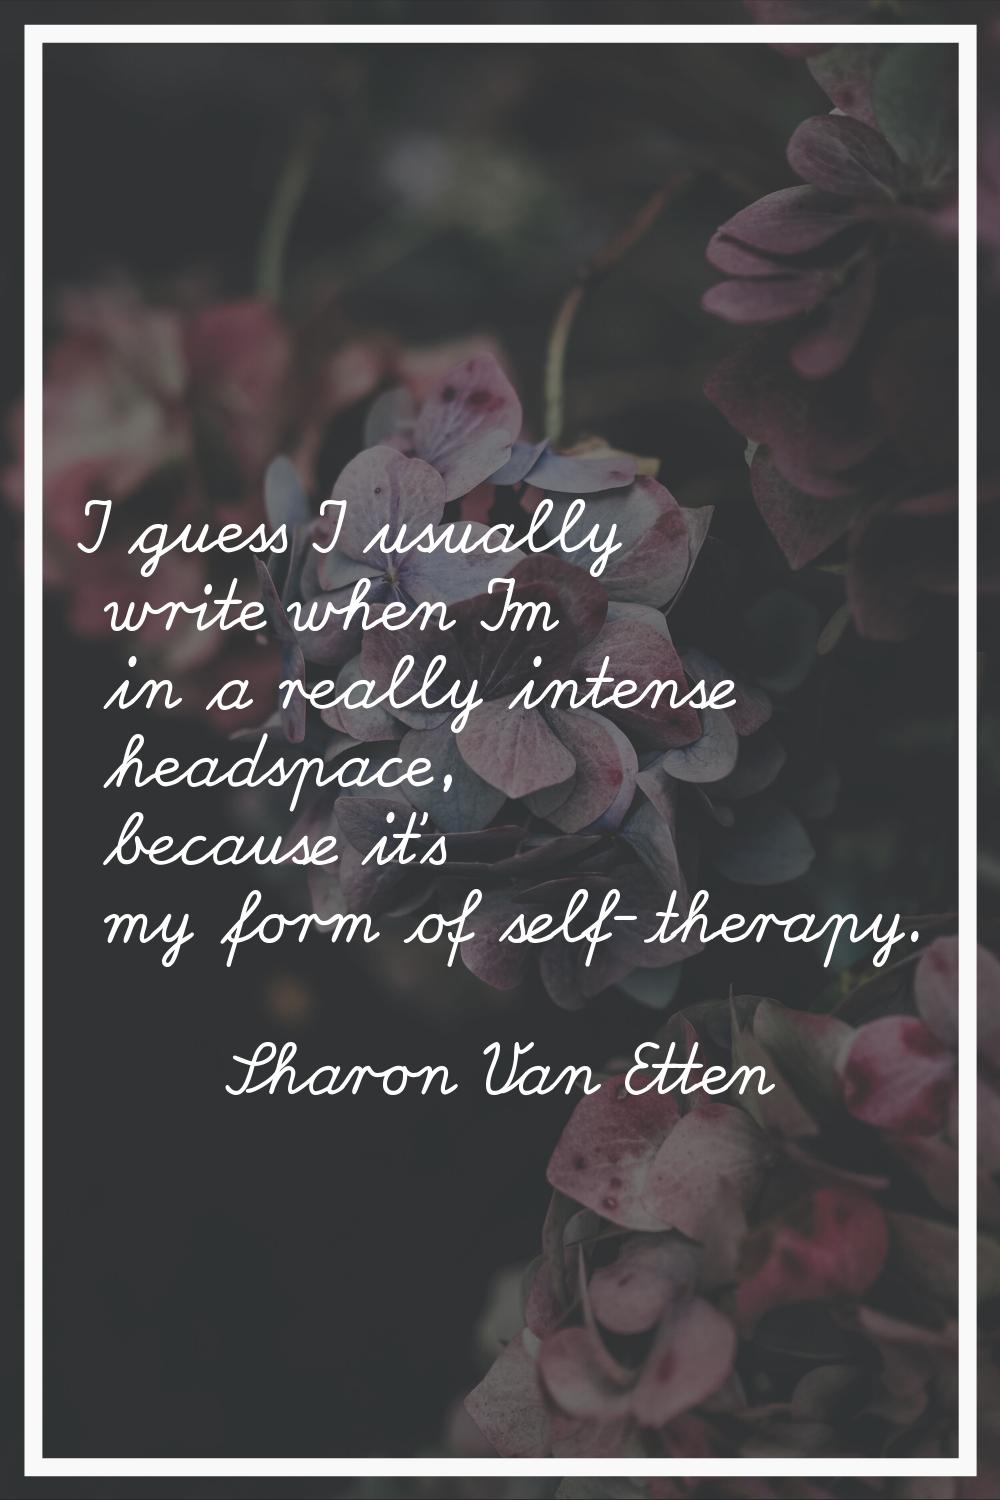 I guess I usually write when I'm in a really intense headspace, because it's my form of self-therap